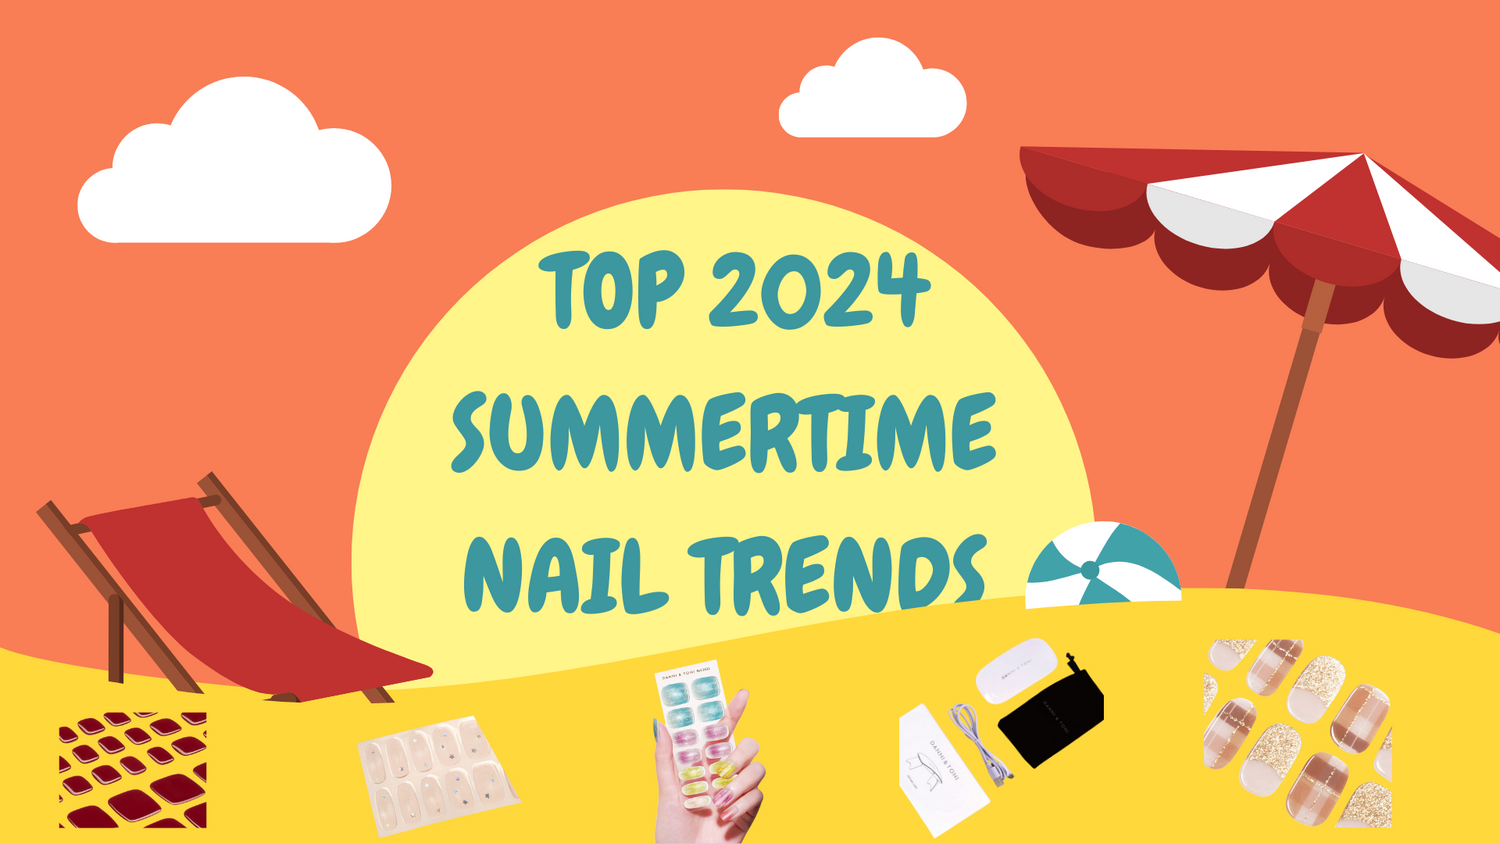 What are the Nail Art & Design Trends for Summer 2024?